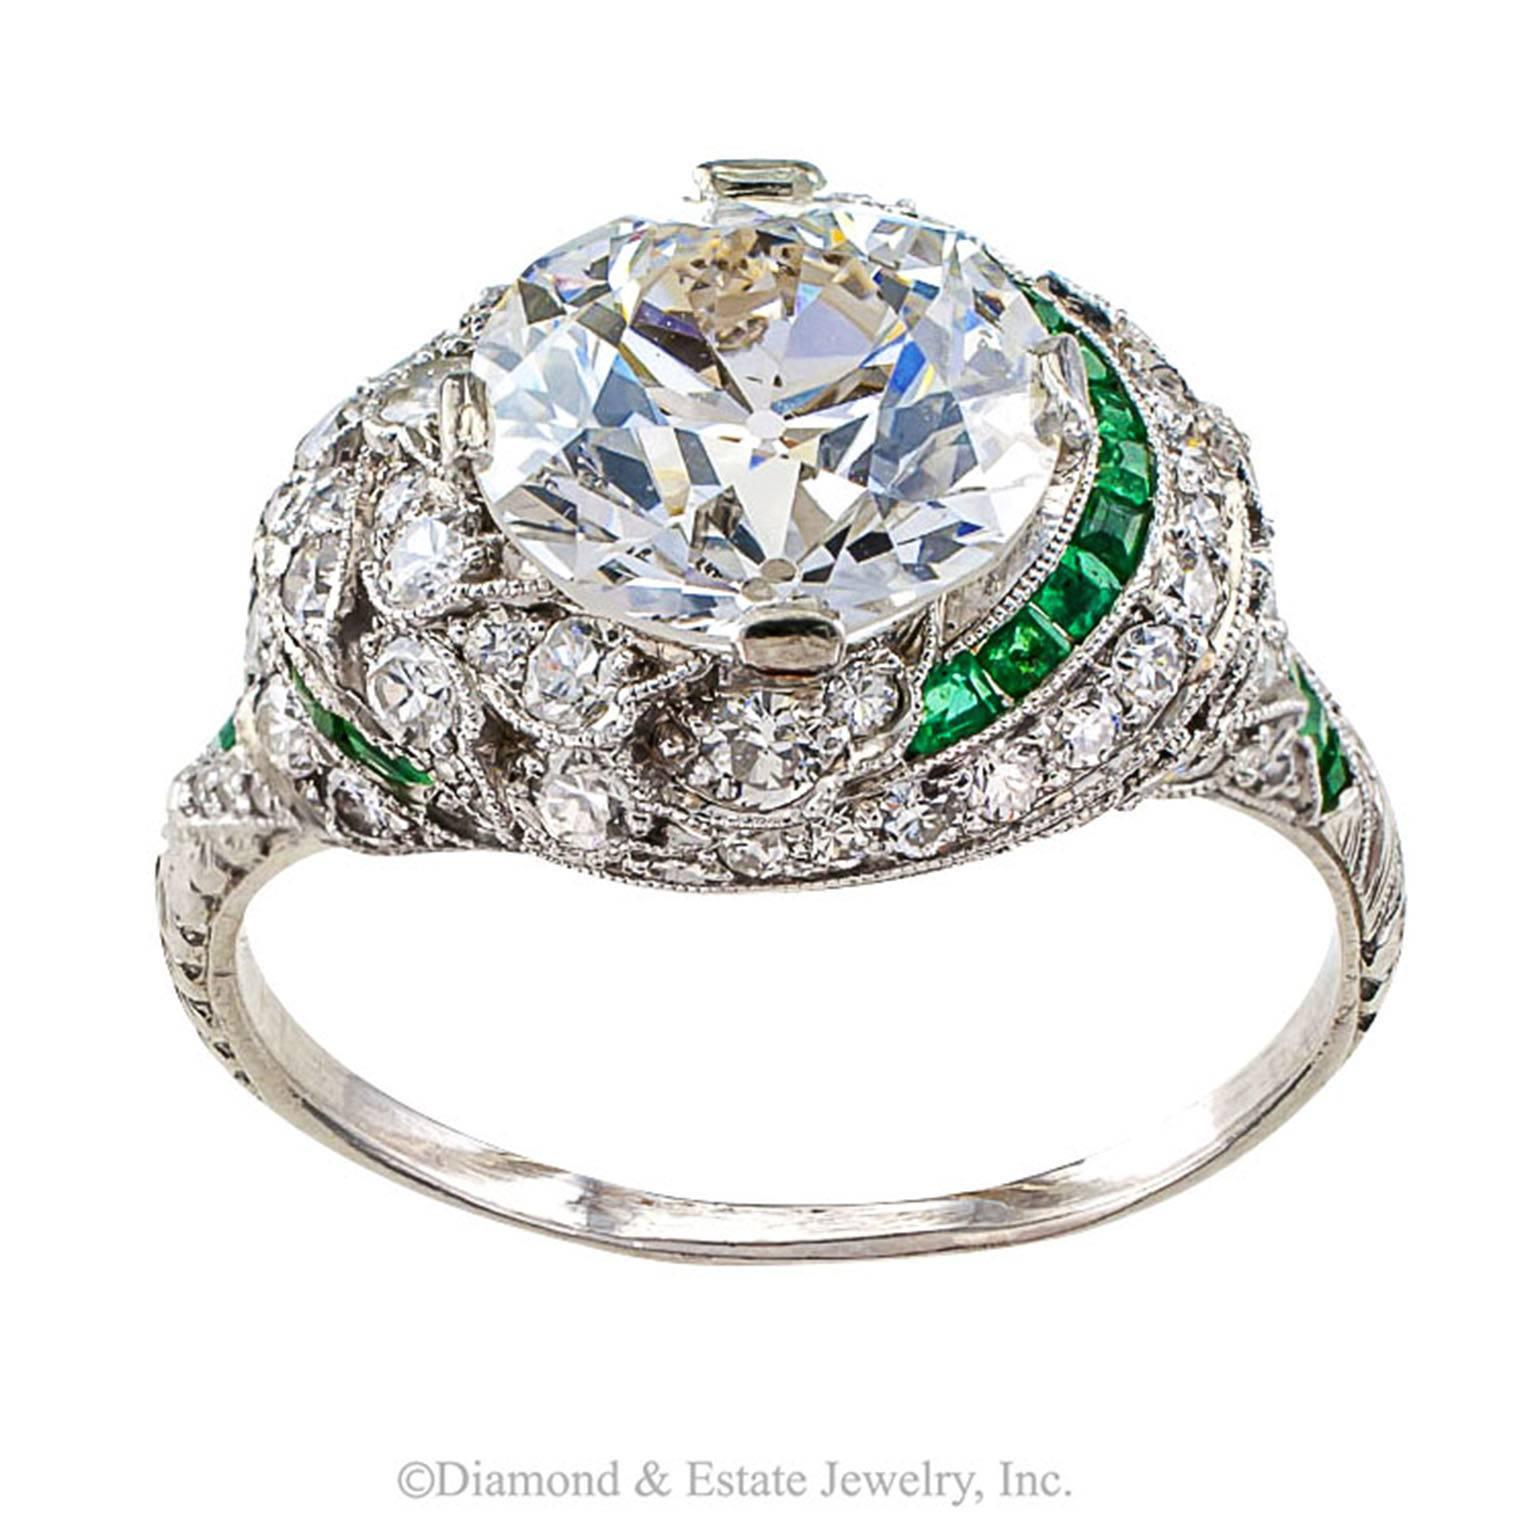 GIA 2.61 Carats F Color SI1 Clarity Old European-Cut Diamond Engagement Ring

Exceptional Art Deco 2.61 carats old European-cut diamond and calibrated emerald solitaire engagement ring mounted in platinum circa 1925.  Rare diamond quality in a